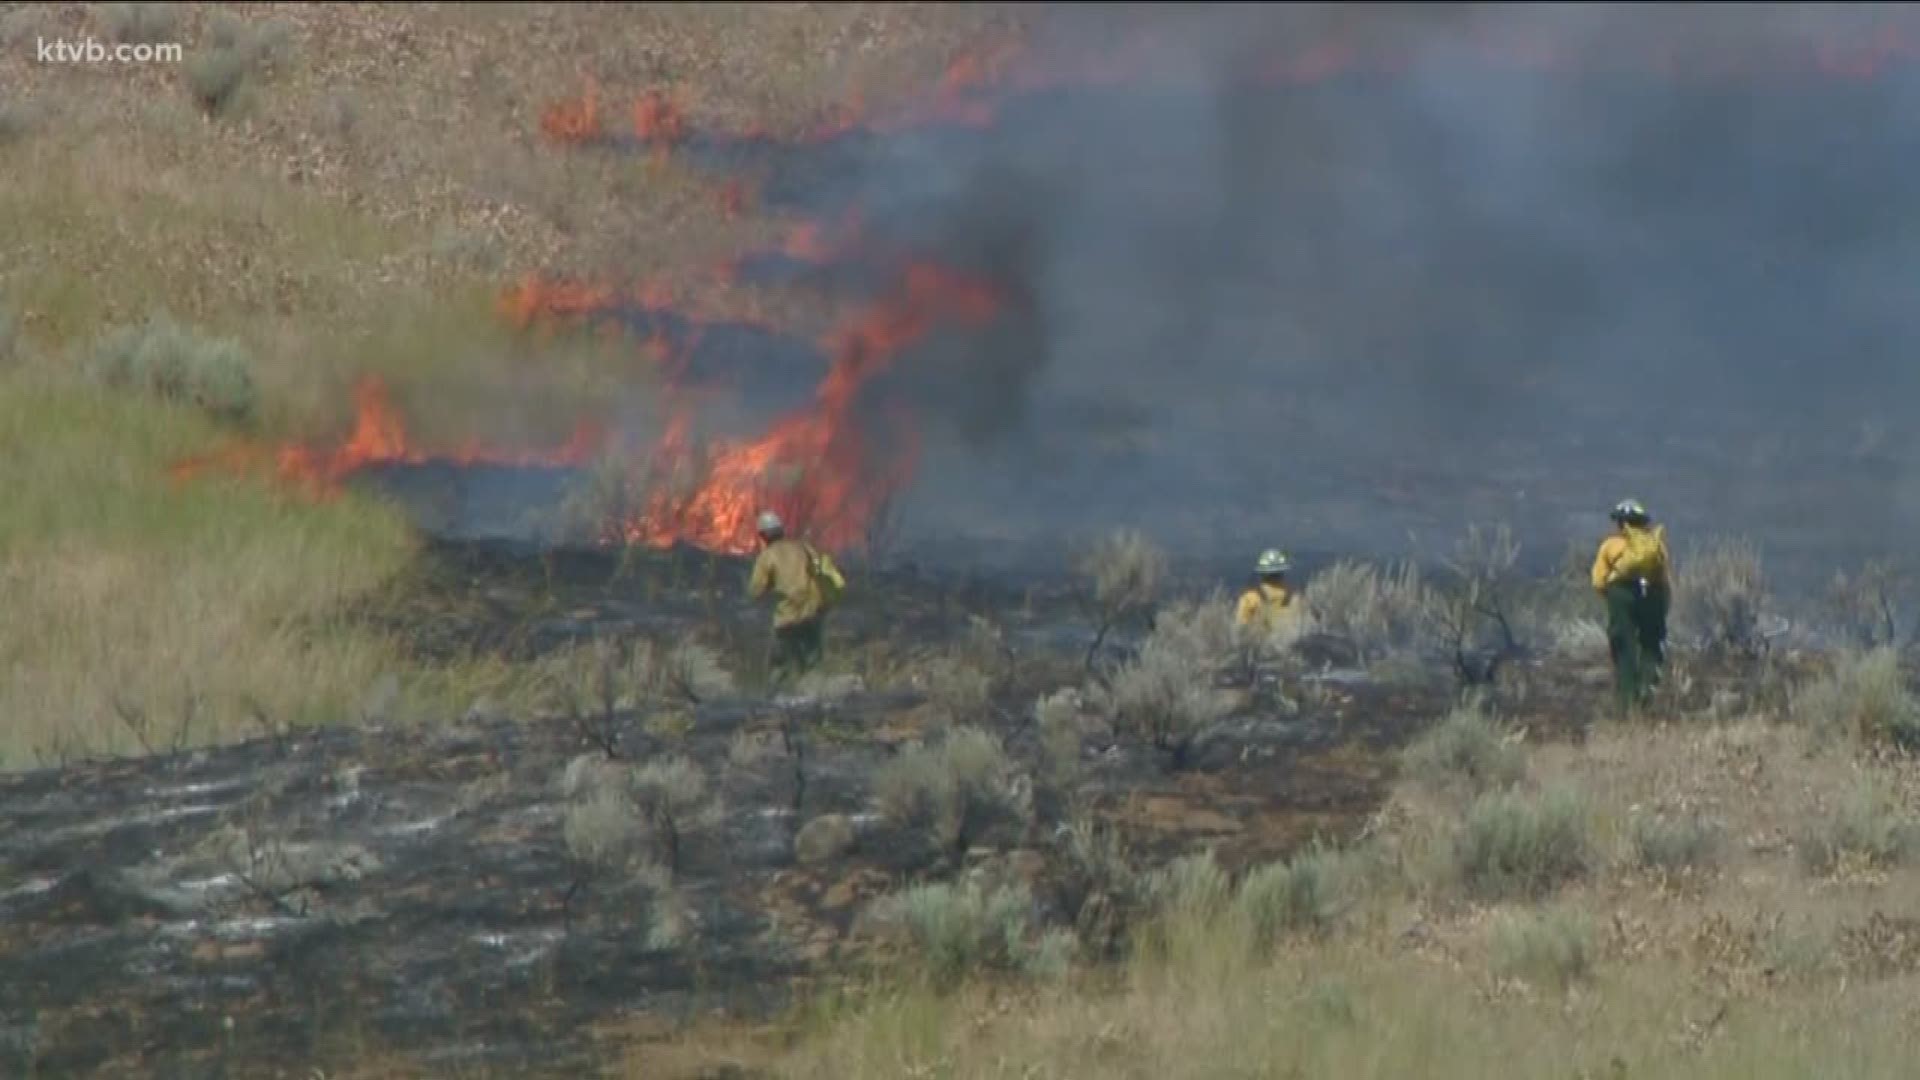 Crews battle fire near Midvale that has casued evacuations and closed Hwy 95